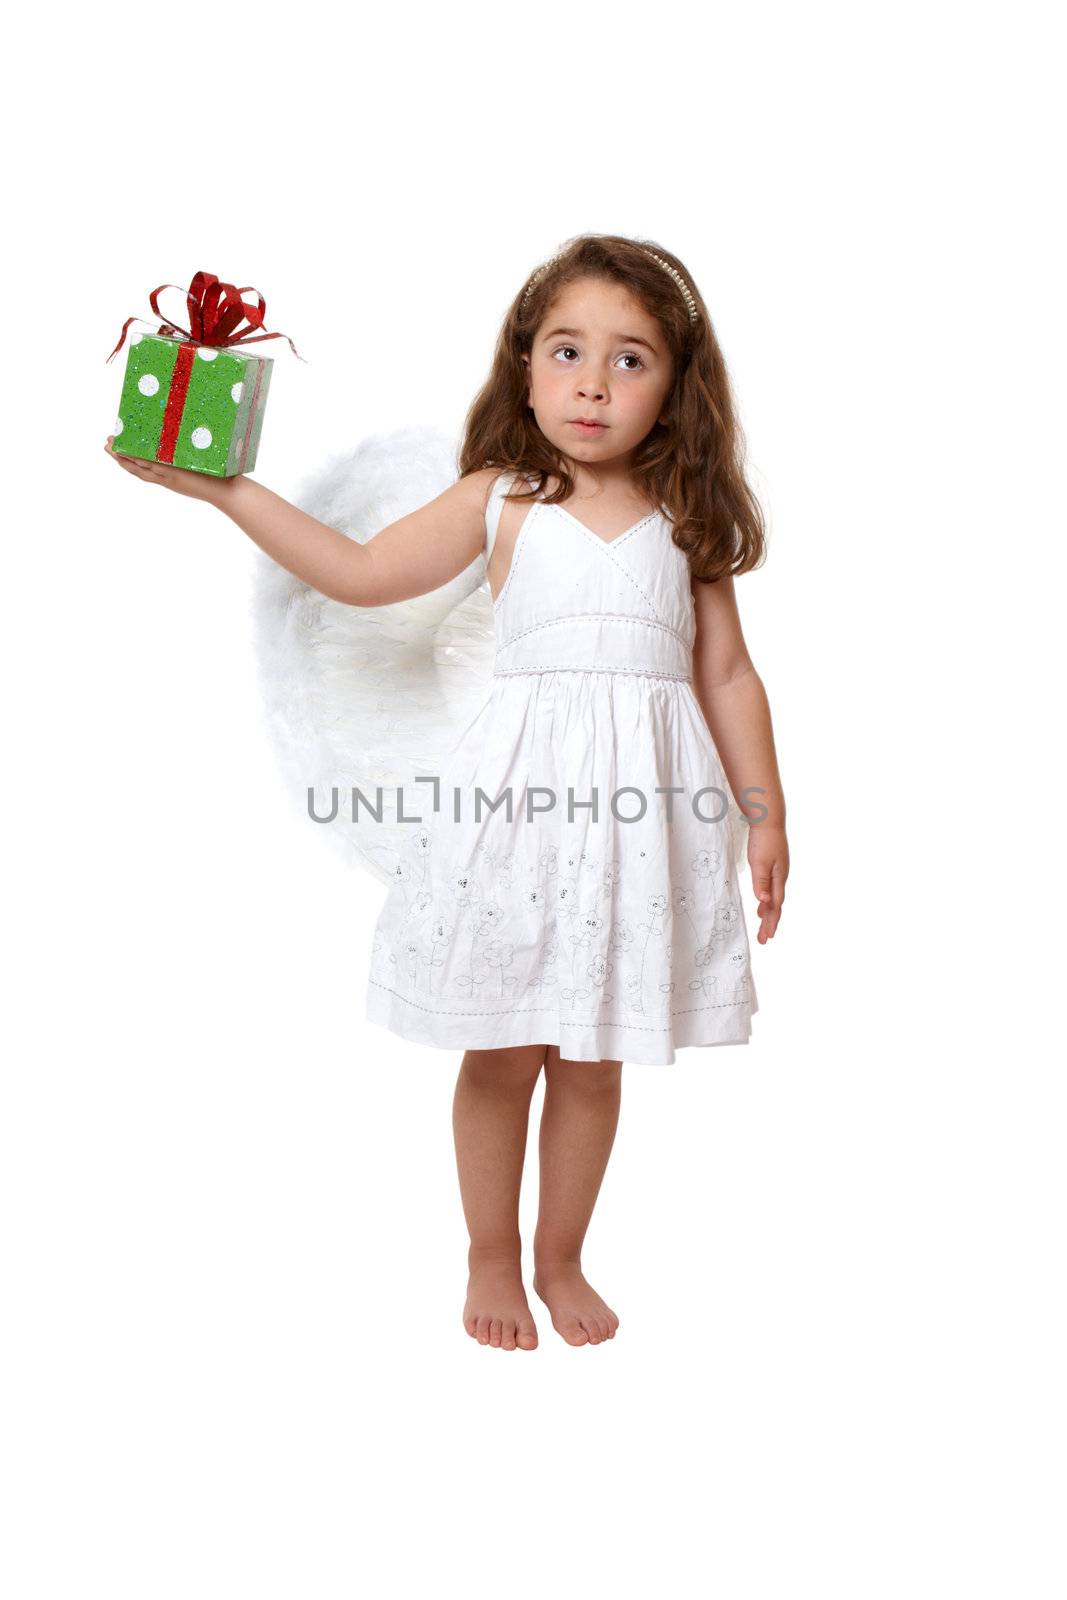 Little angel girl holding a present by lovleah